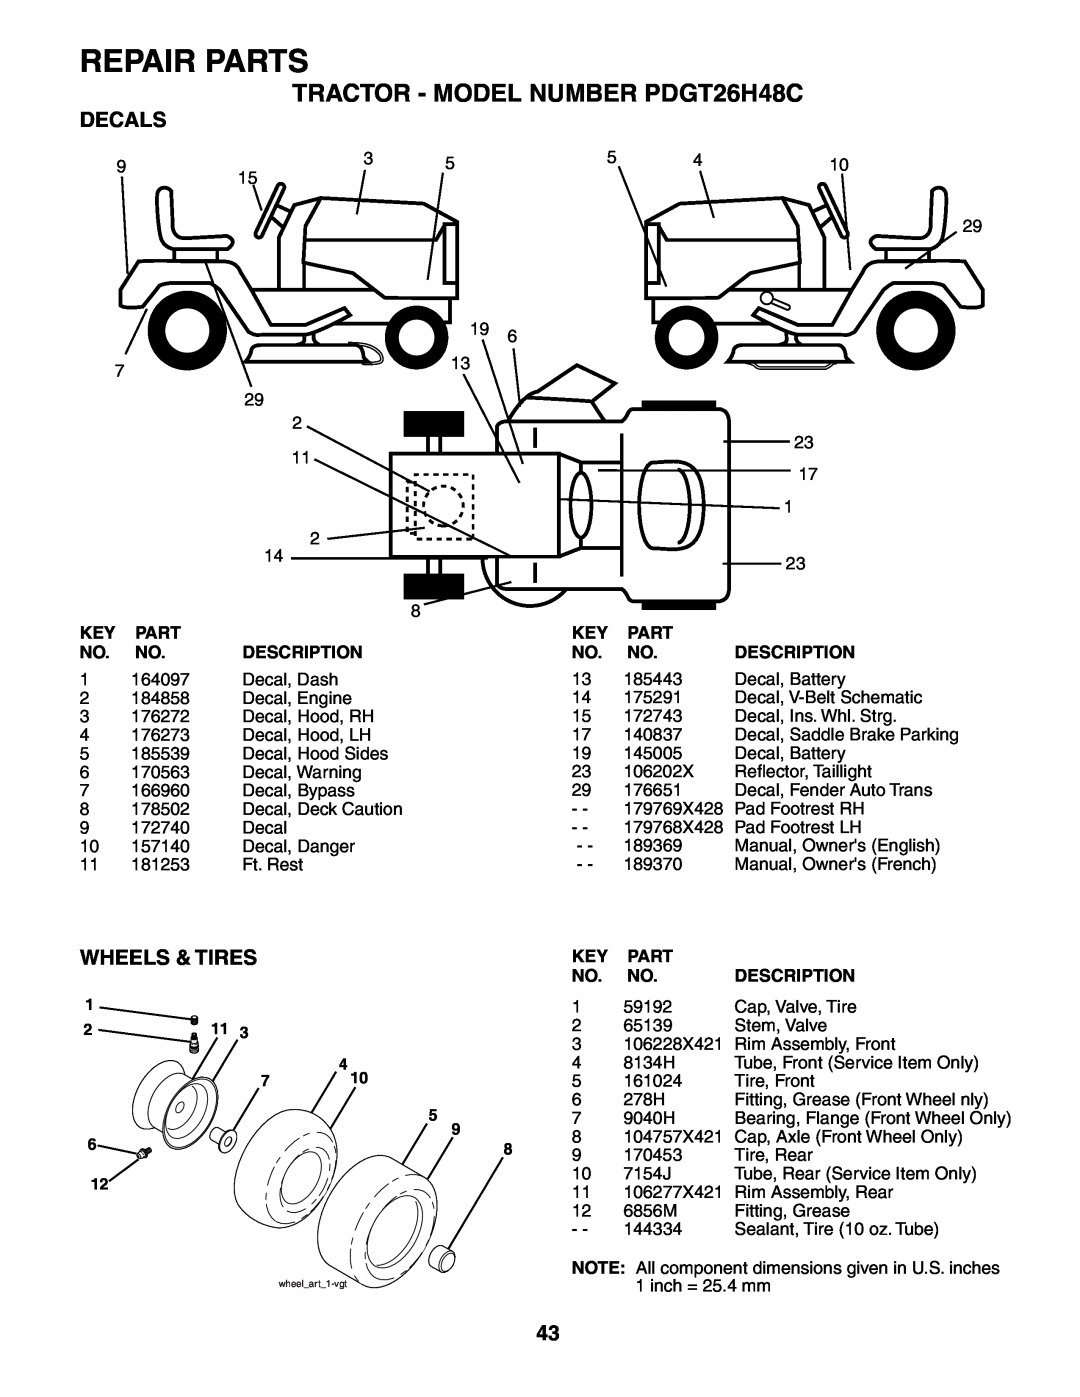 Poulan owner manual Decals, Wheels & Tires, Repair Parts, TRACTOR - MODEL NUMBER PDGT26H48C, wheelart1-vgt 